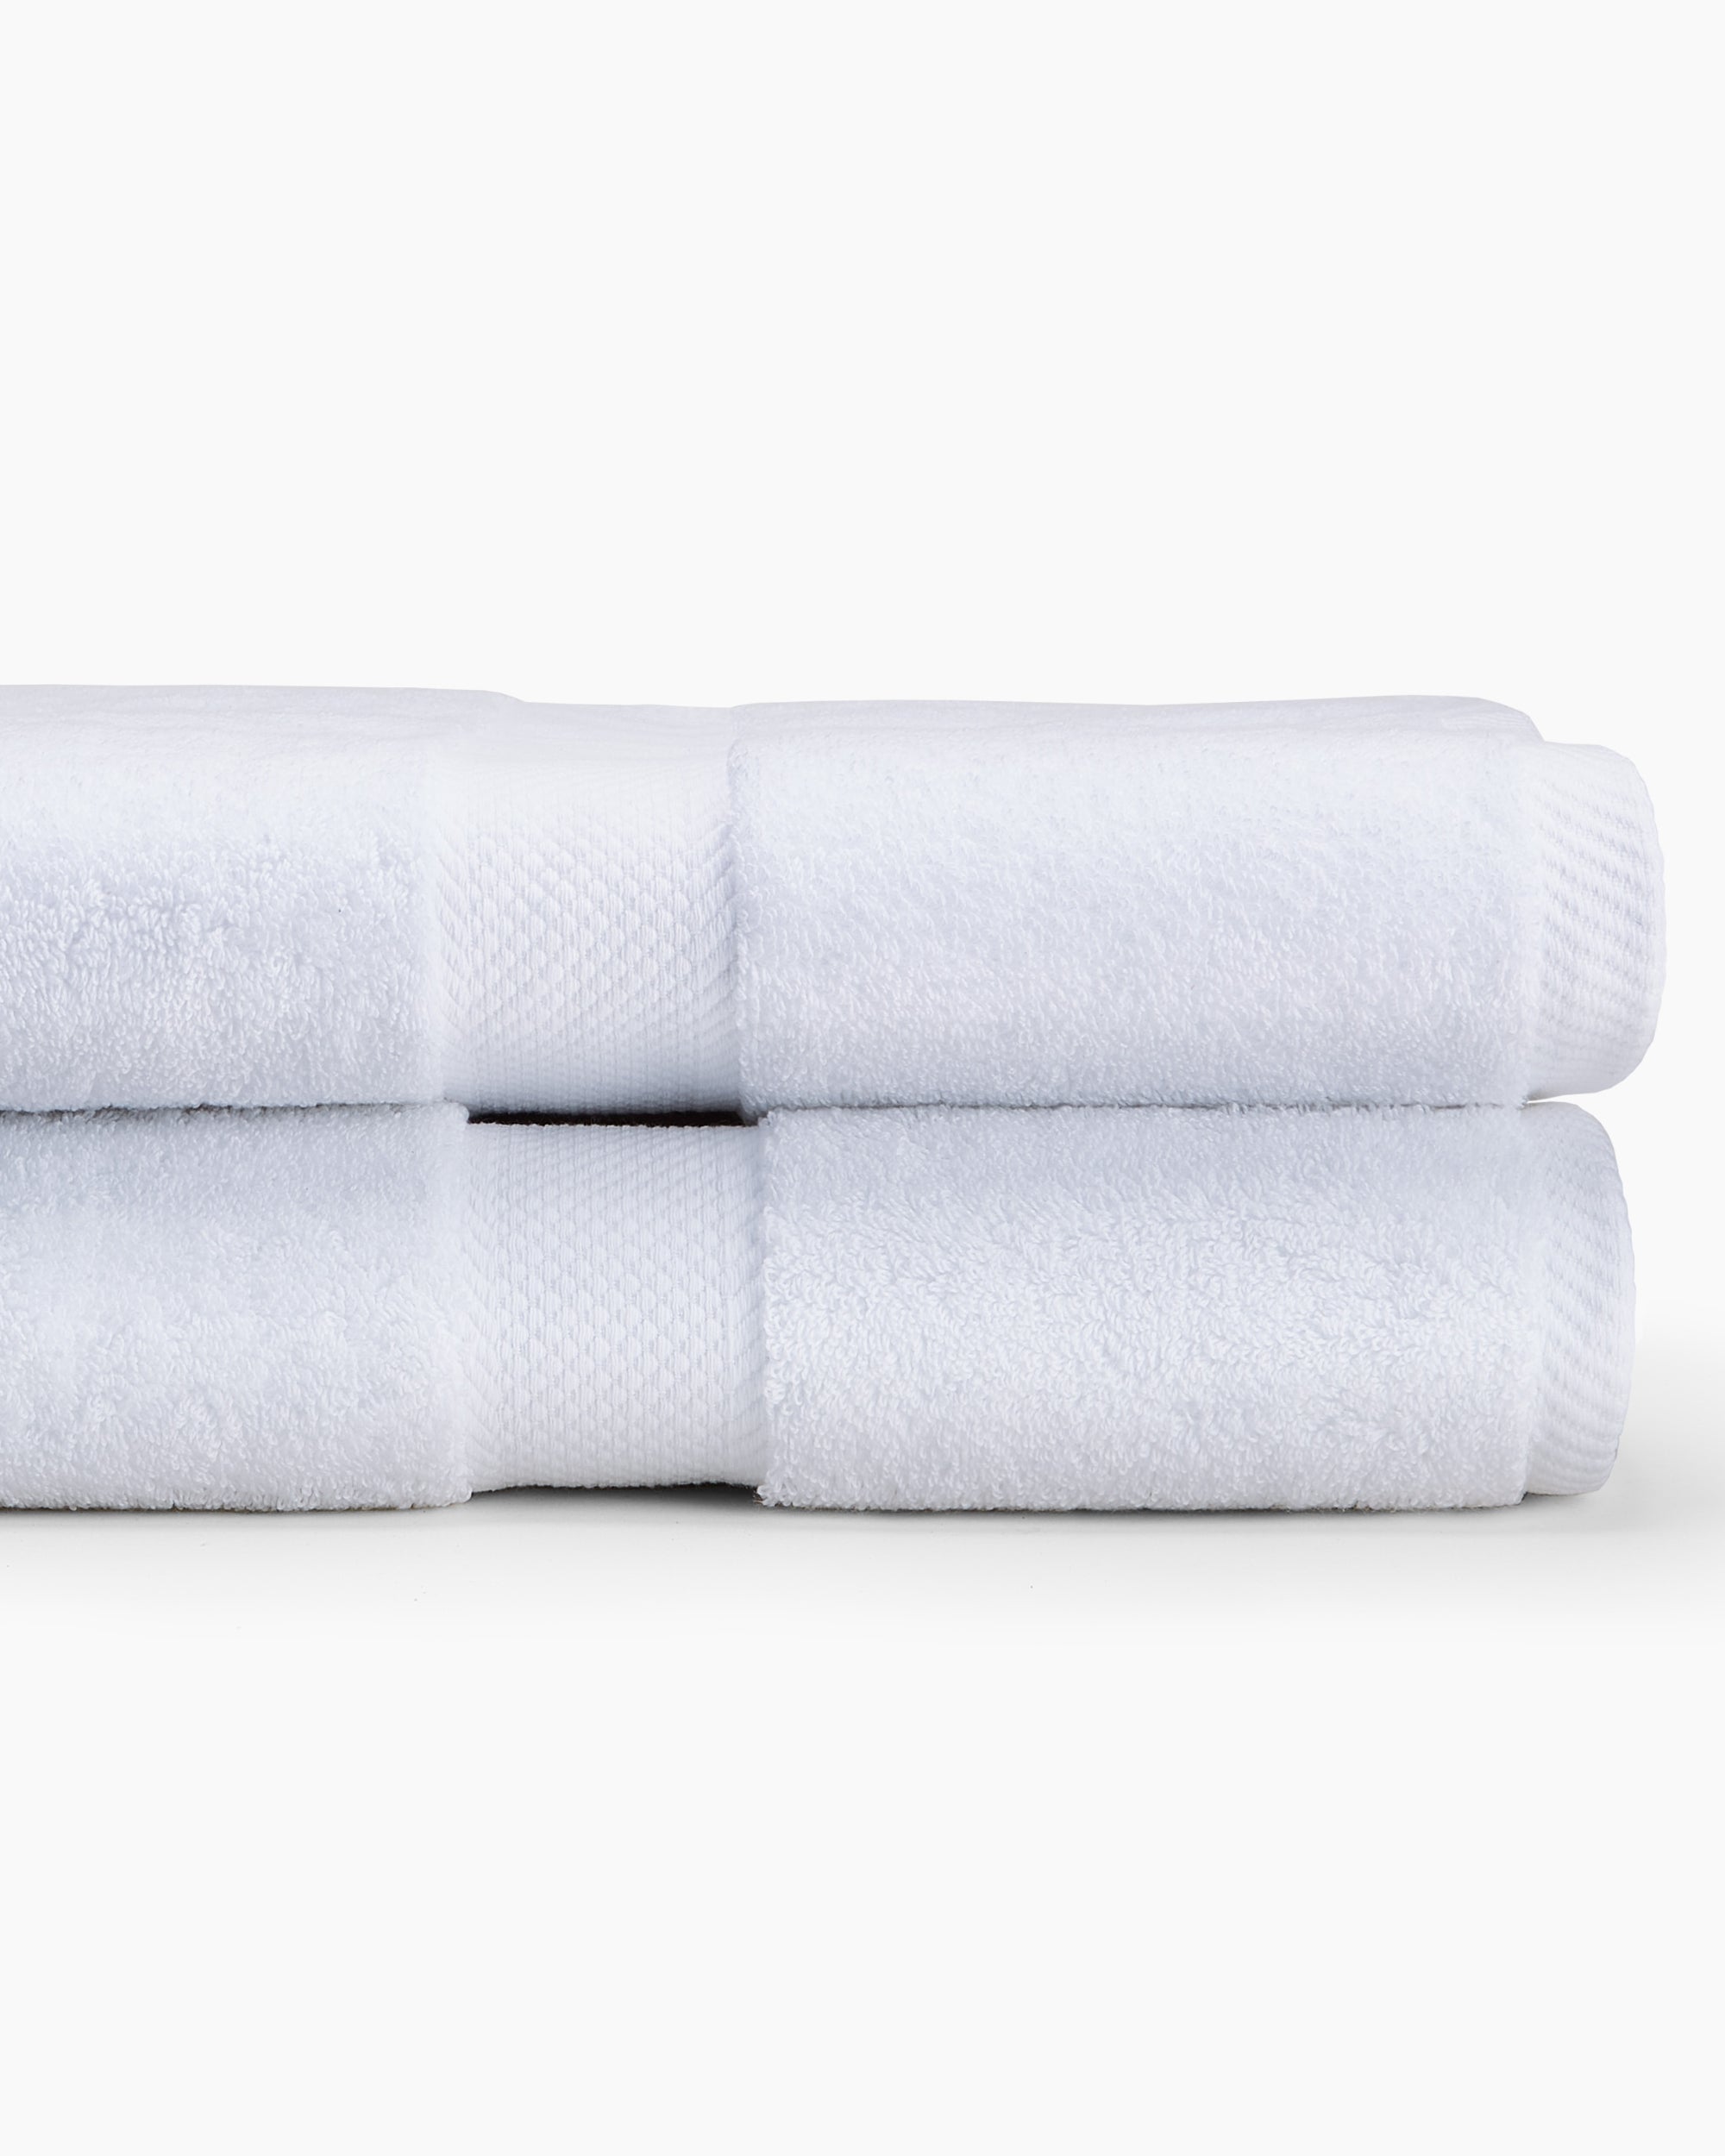 https://authenticity50.com/cdn/shop/products/super-soft-absorbent-plush-made-in-america-cotton-bath-towels.jpg?v=1674154920&width=2000